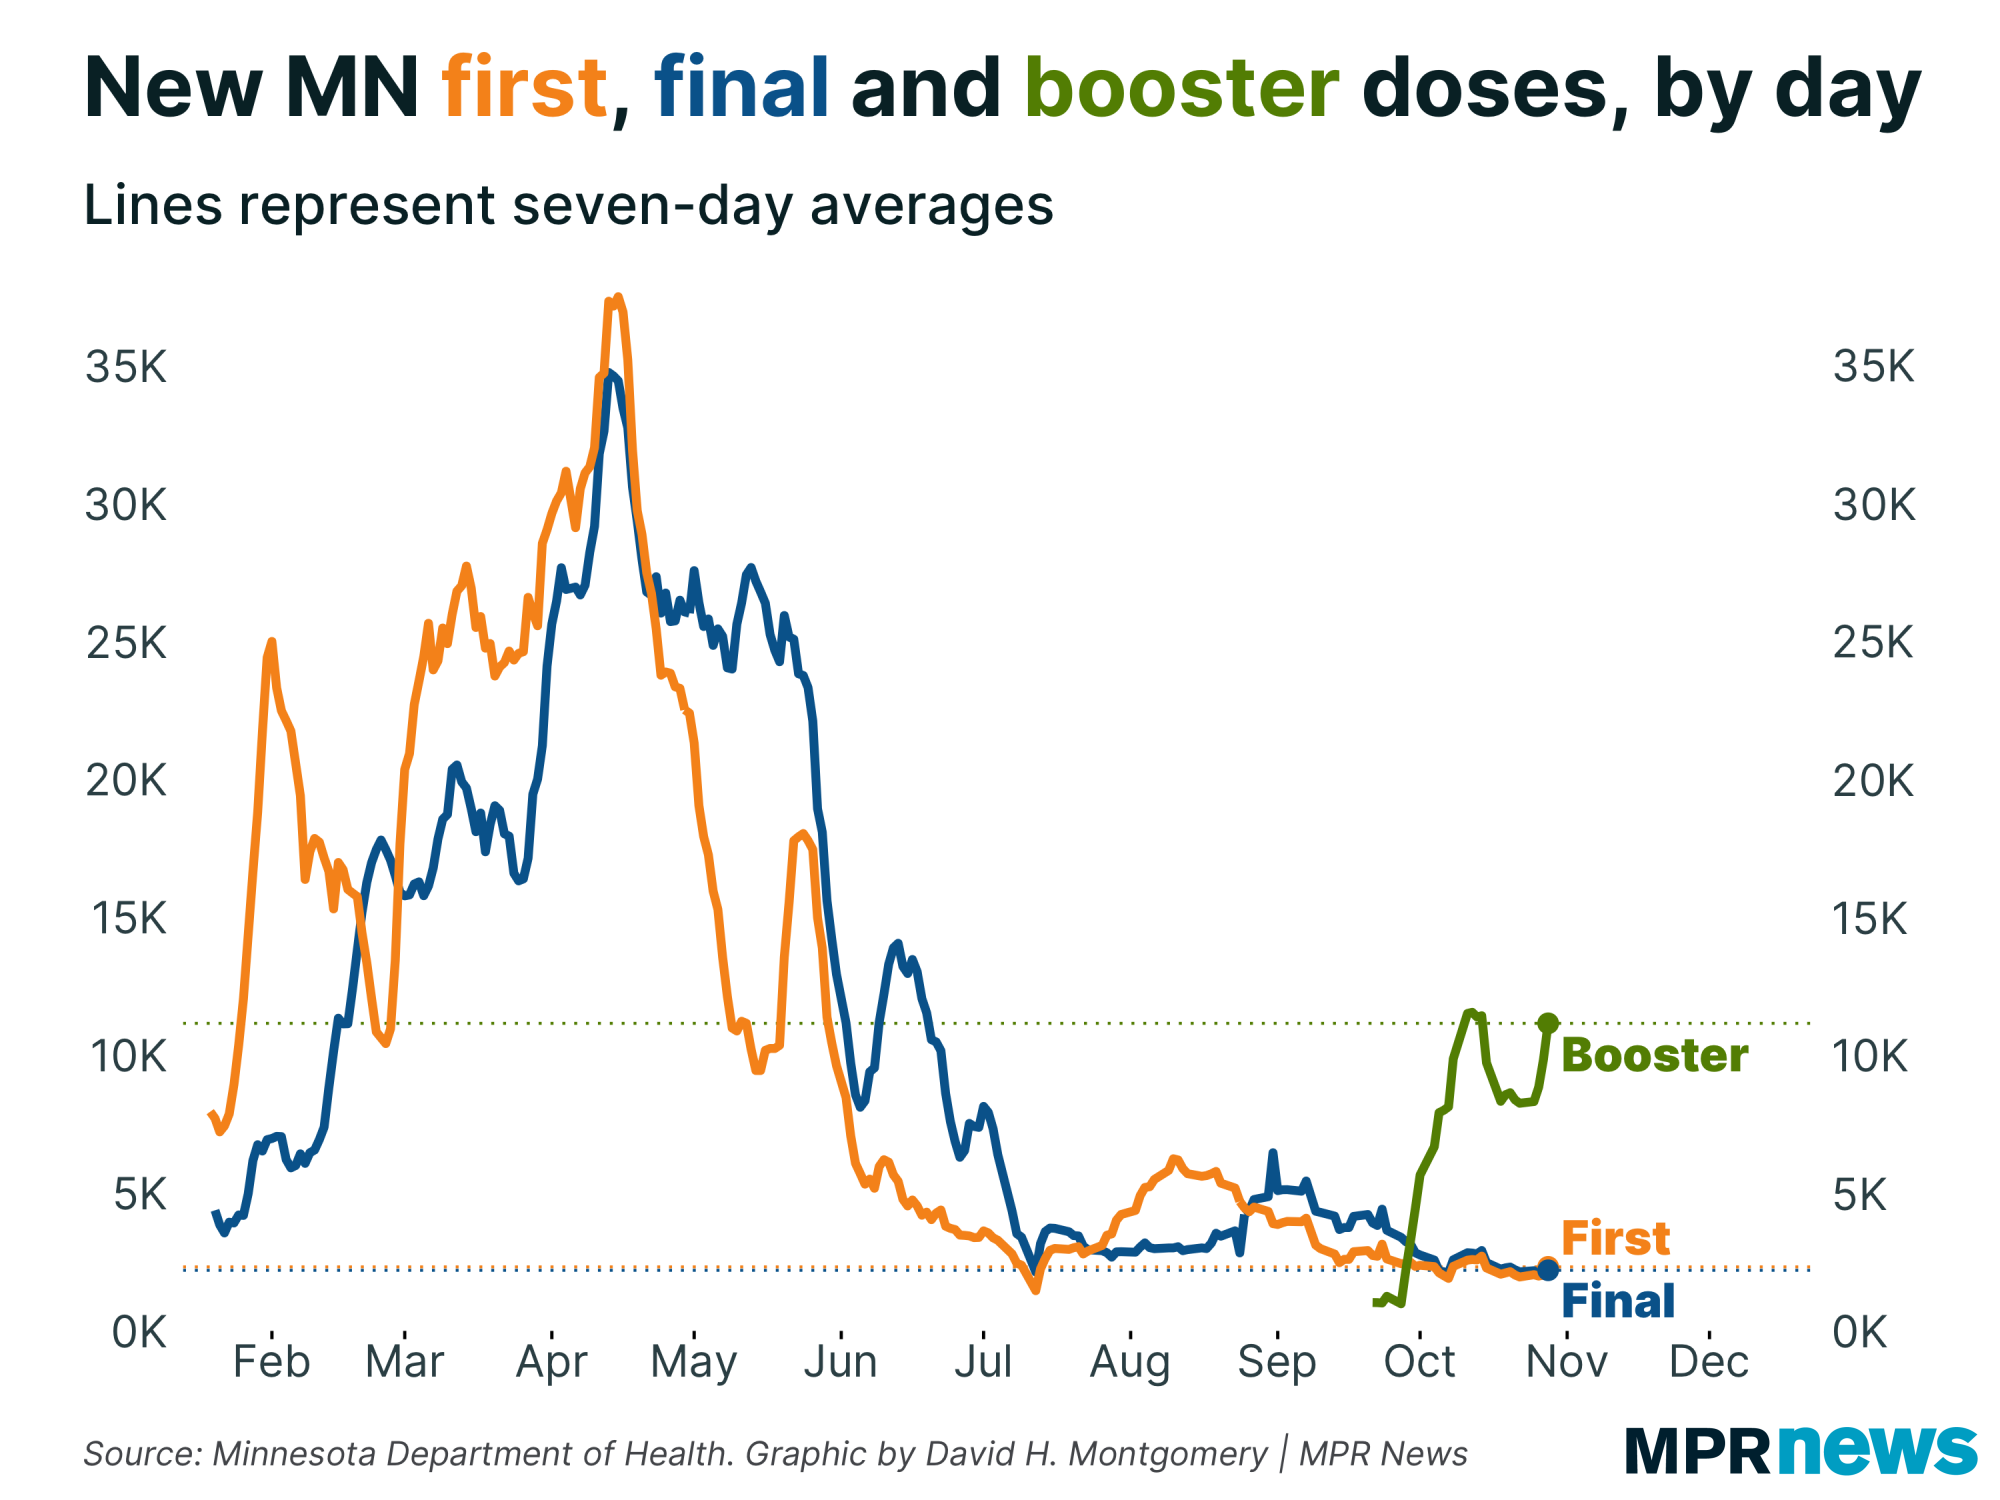 Graph of new first, final and booster doses of COVID-19 vaccine in Minnesota